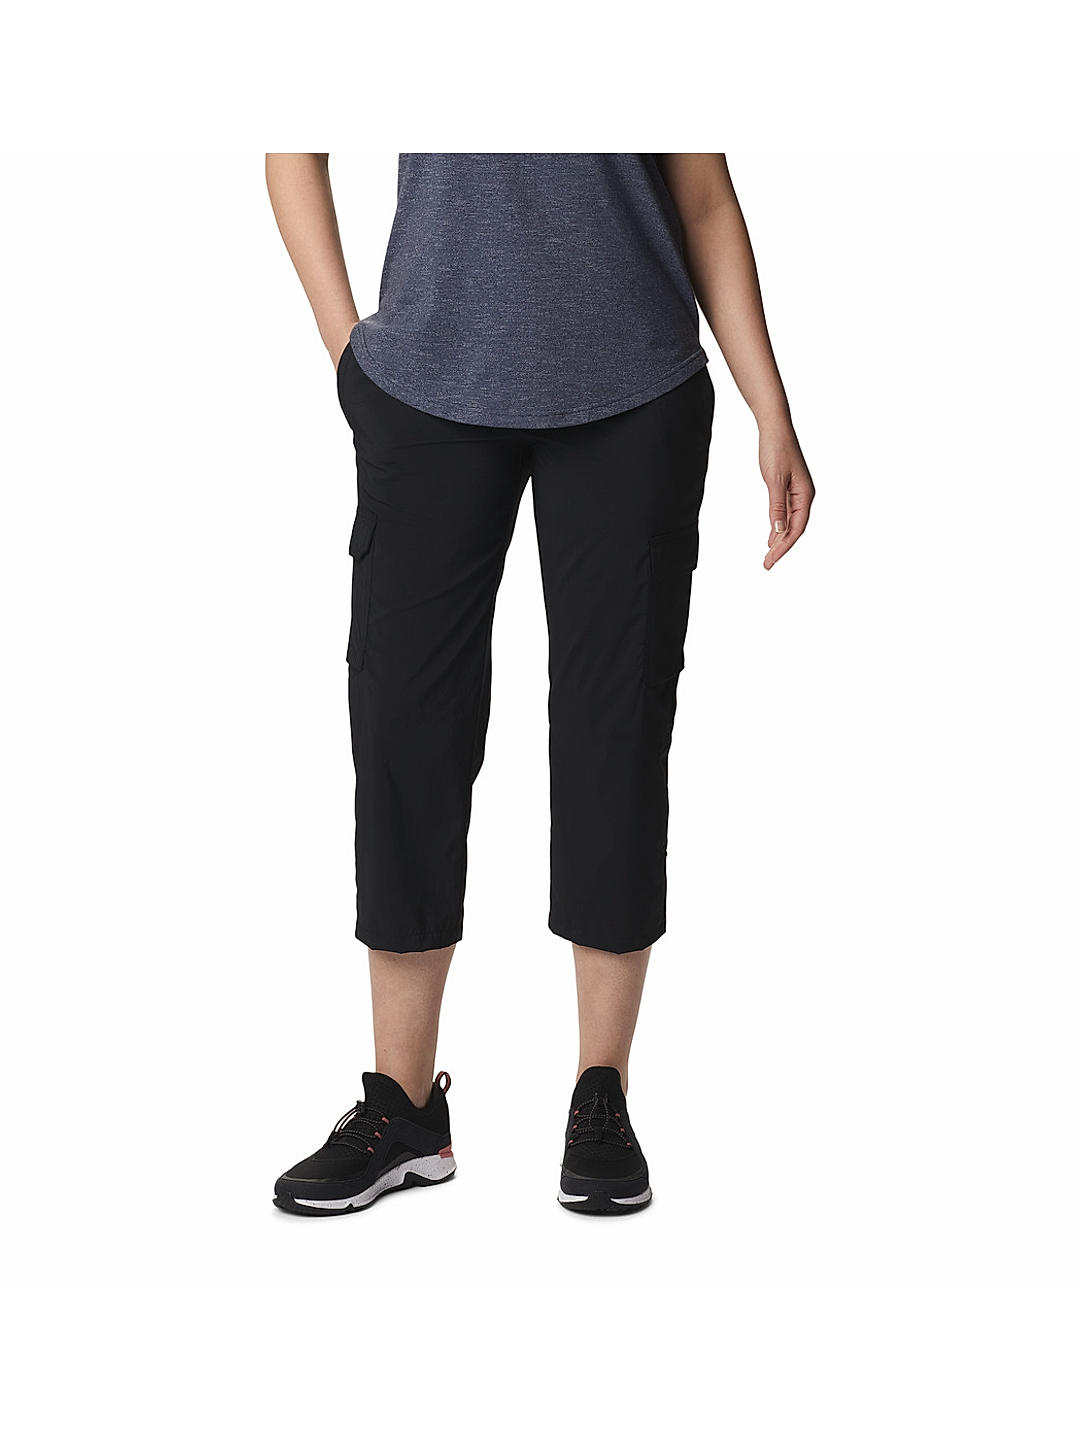 Capri Pants for Spring & Summer | The North Face